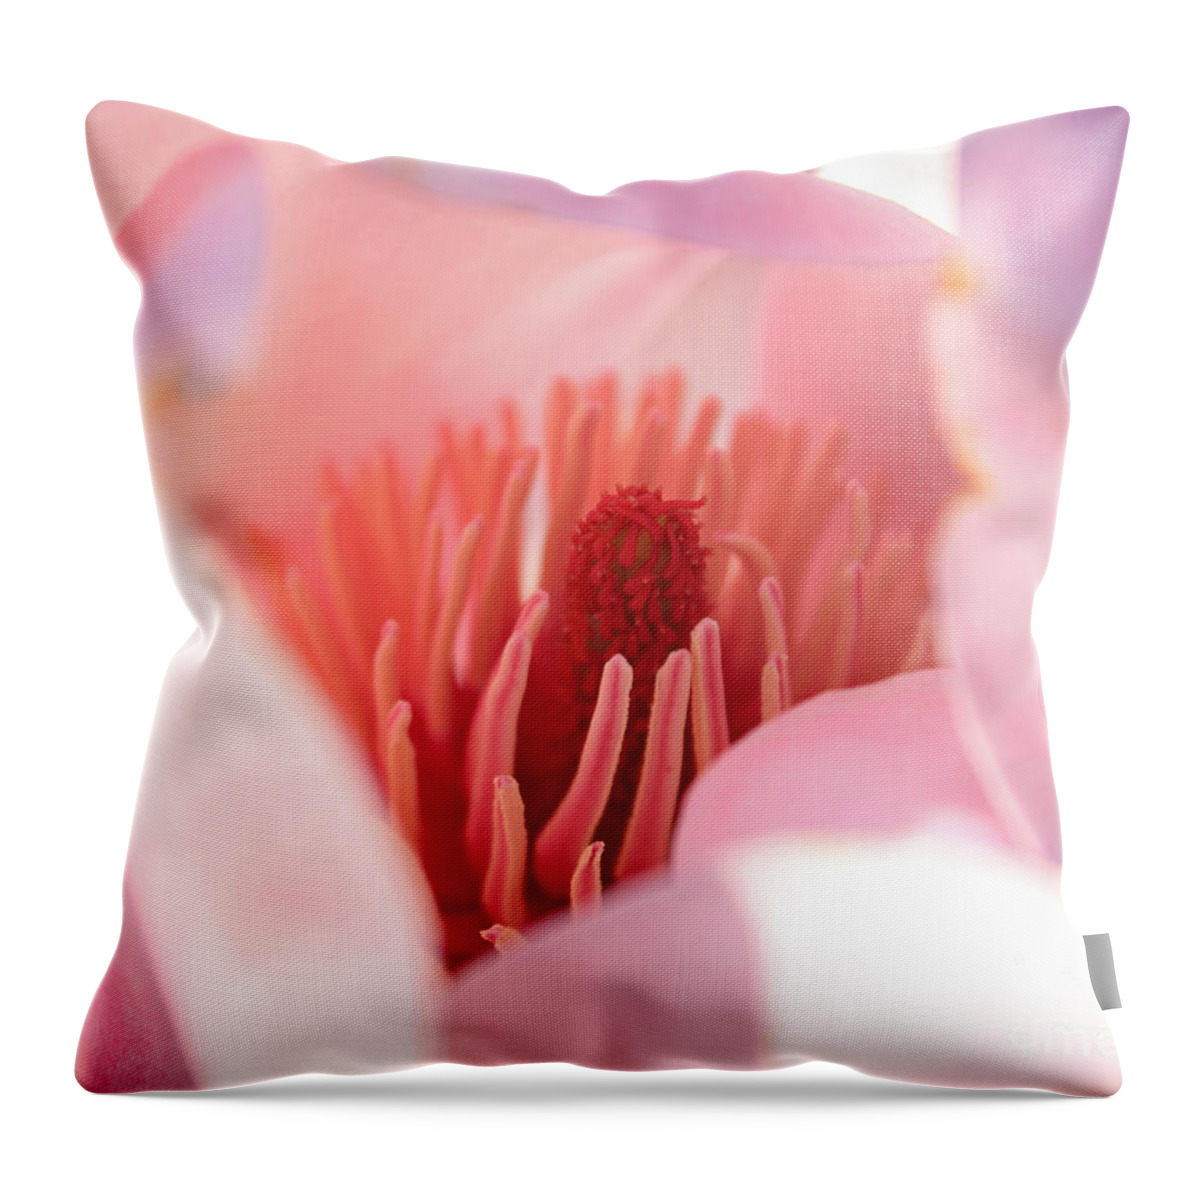 Magnolia Throw Pillow featuring the photograph Magnolia Flower by Julia Gavin